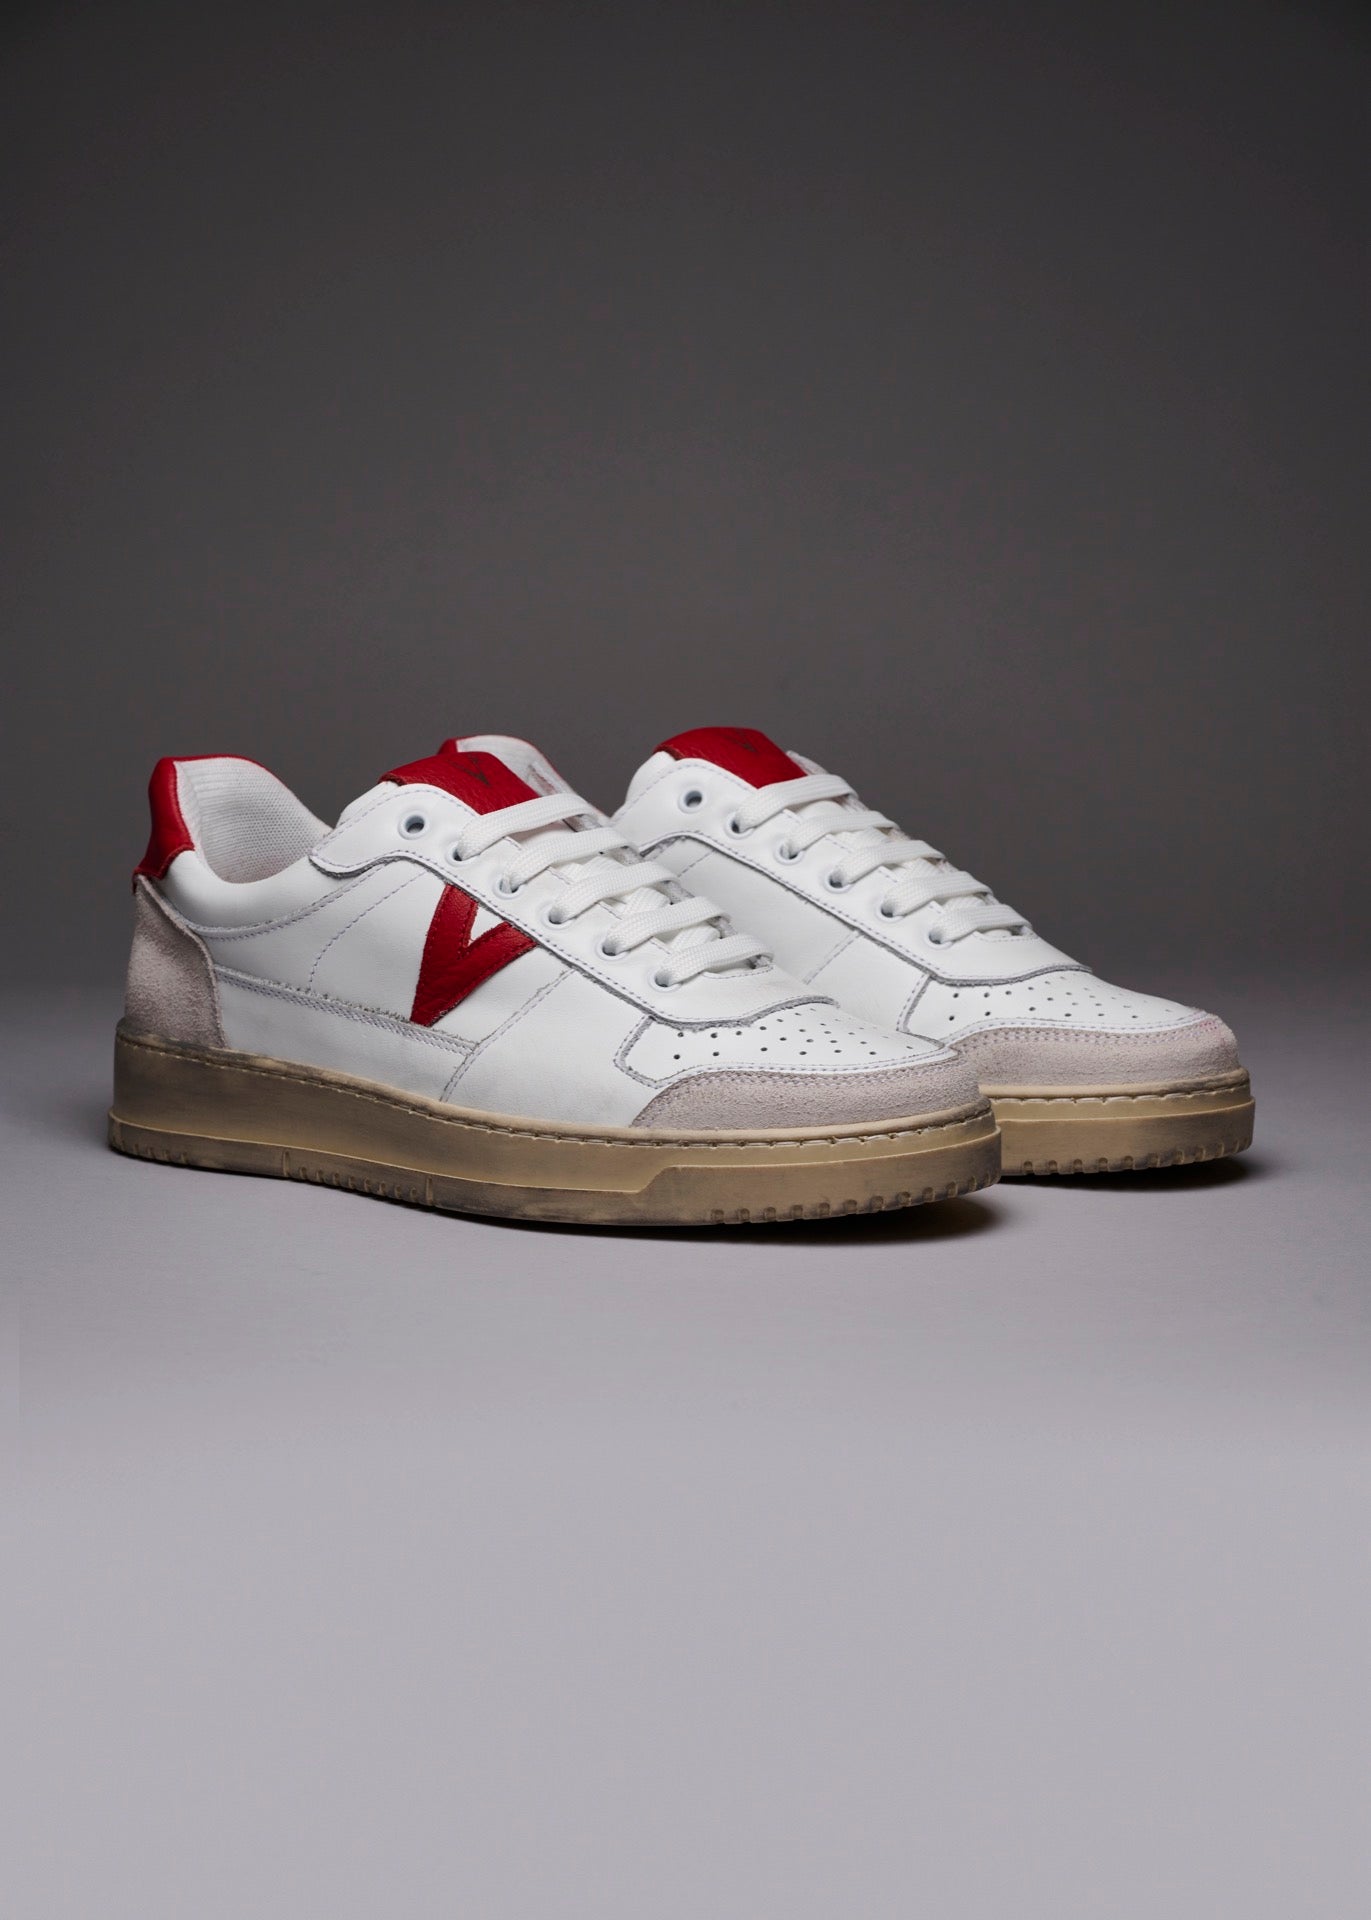 COLLEGE - White Sneakers with Red back and insert